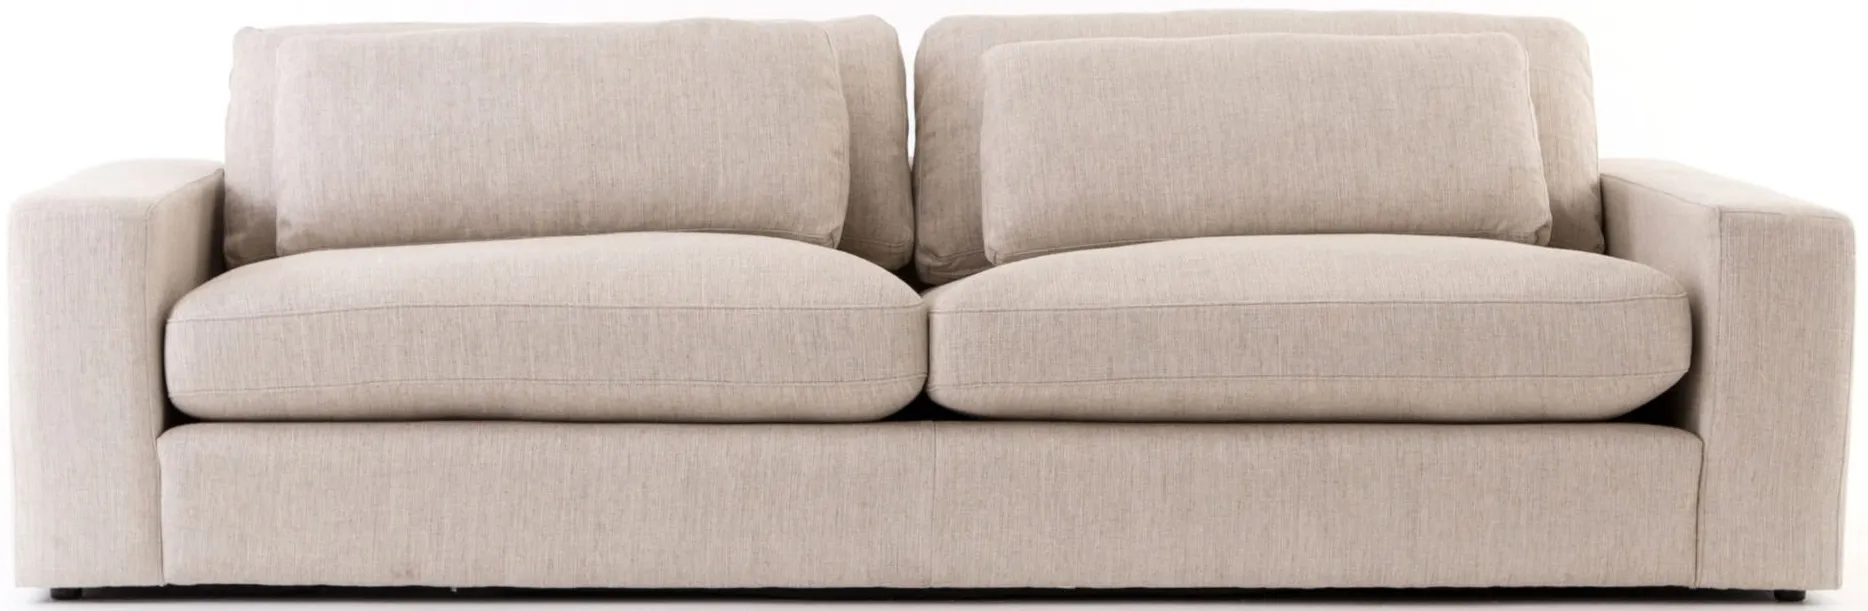 Bloor Sofa in Essence Natural by Four Hands